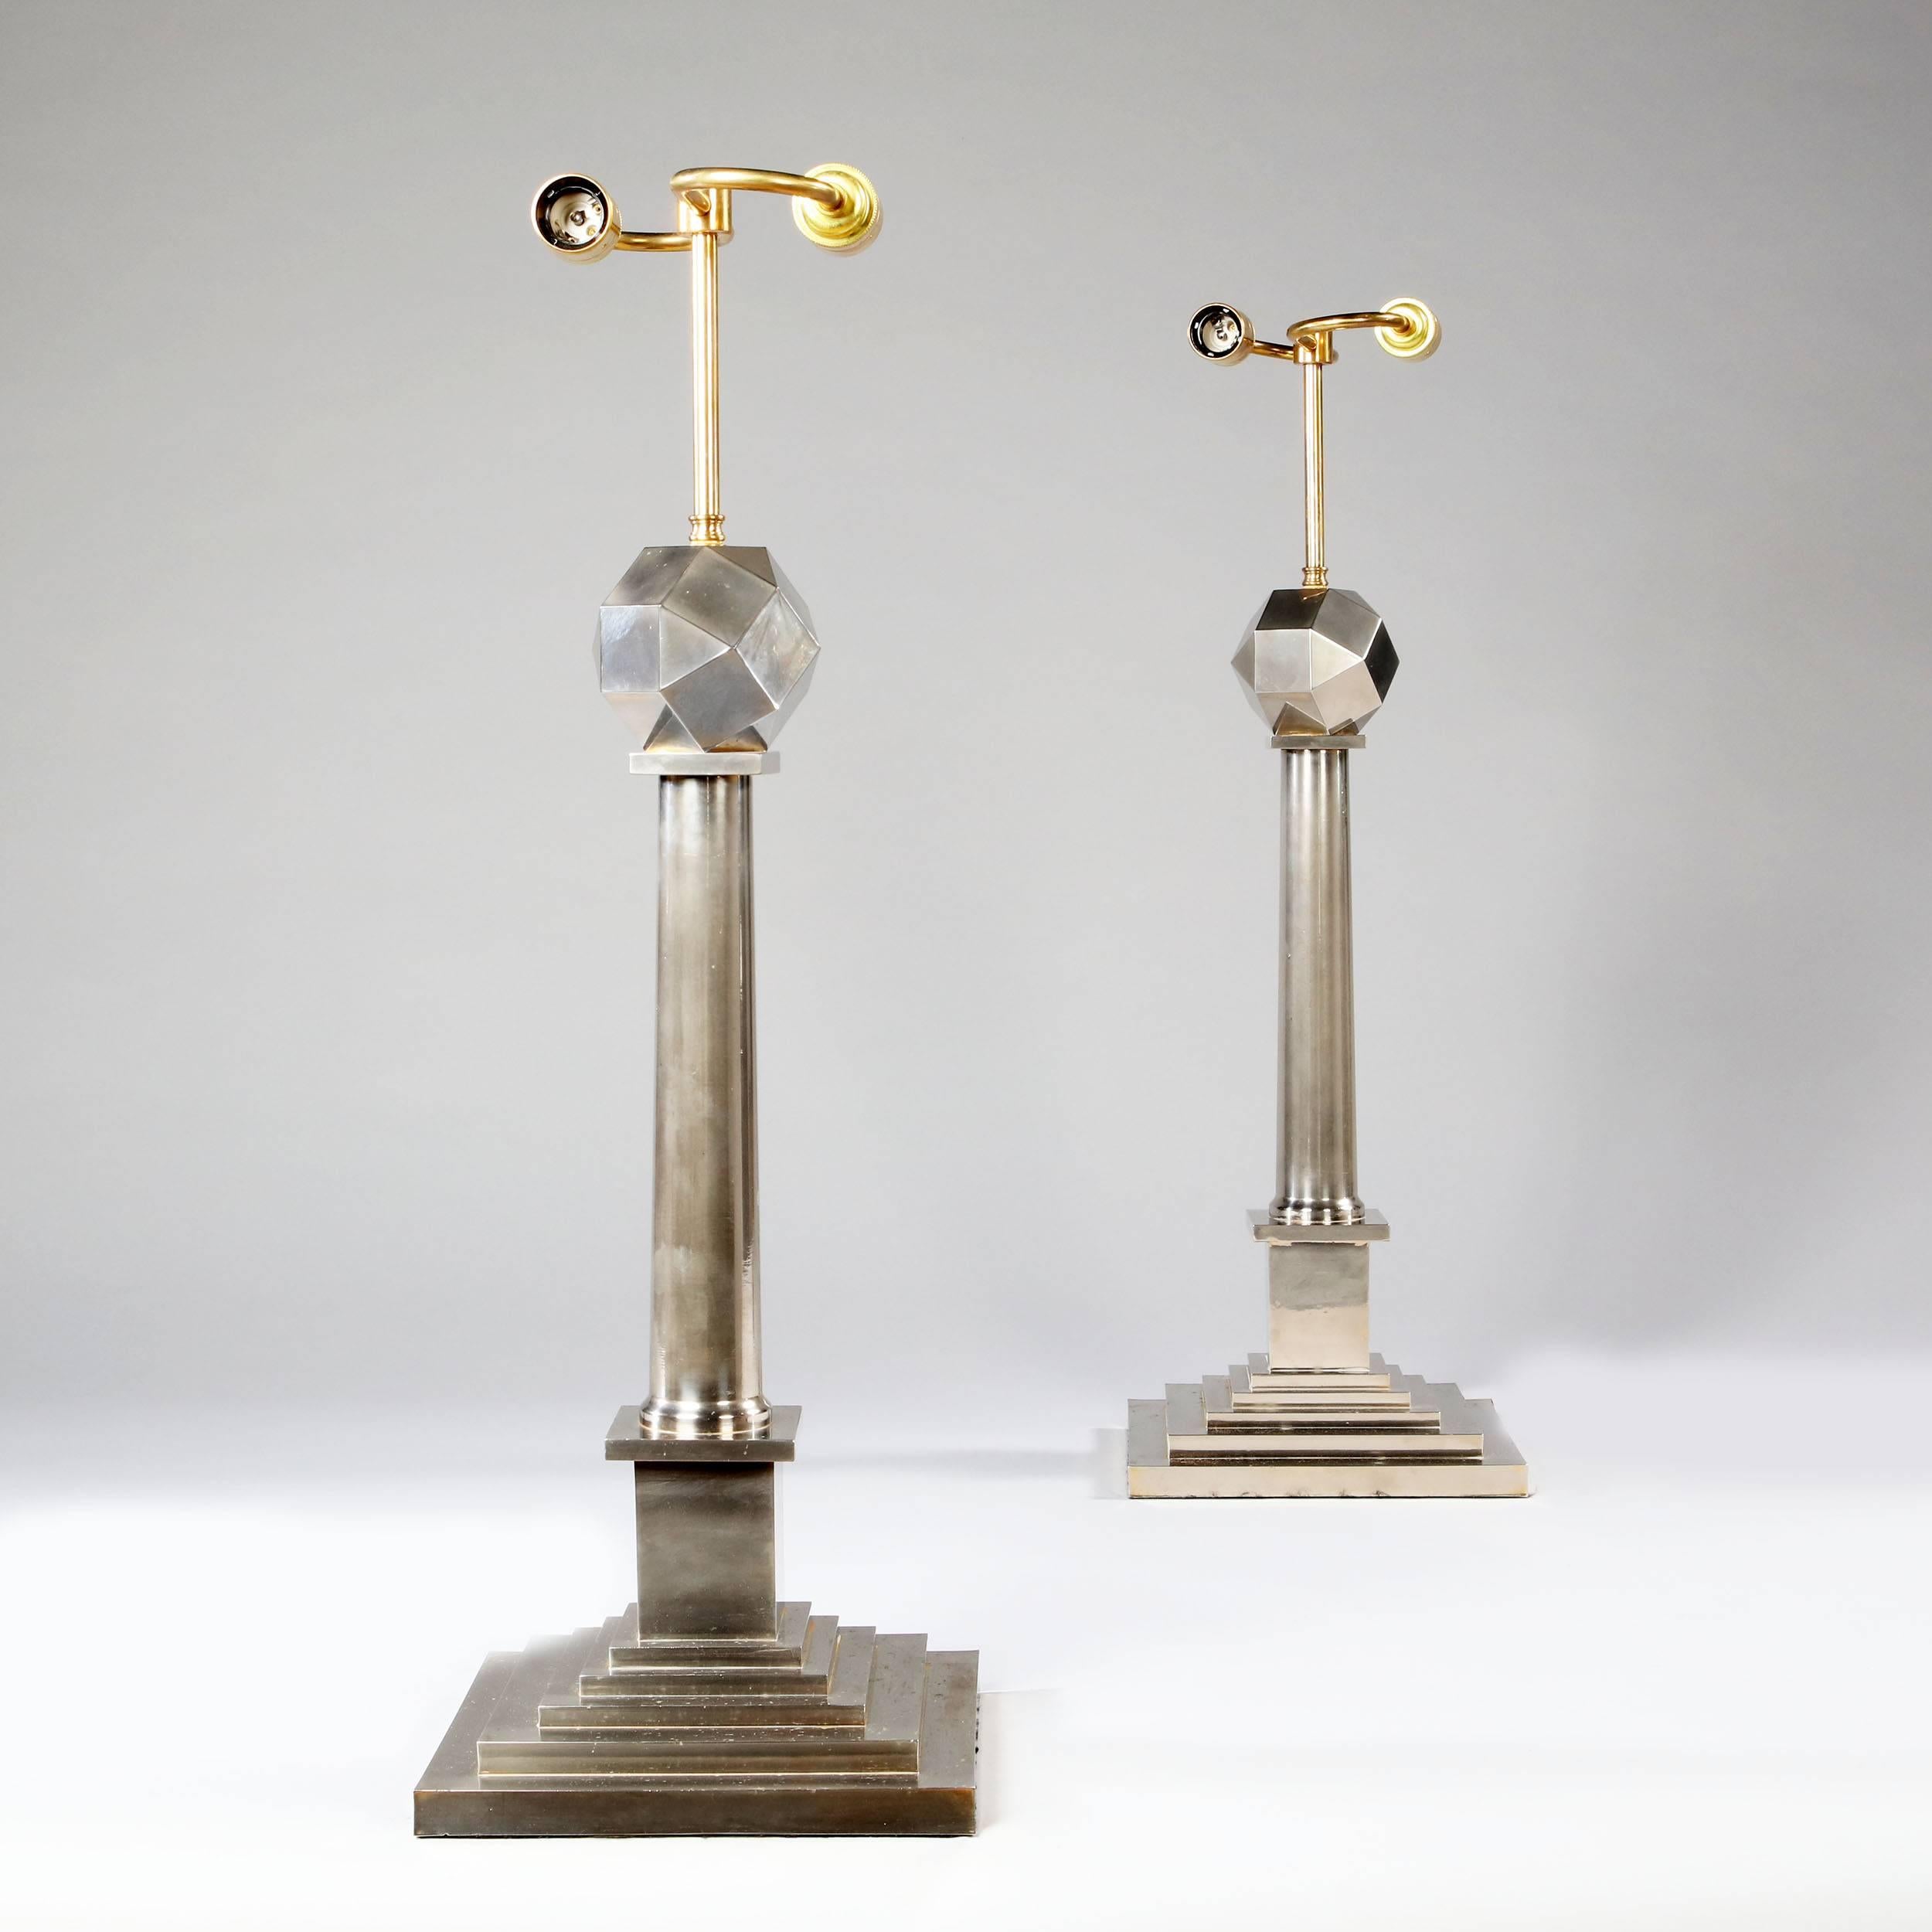 A pair of unusual Mid-Century column lamps in silver nickel, the stems are supported on exaggeratedly stepped plinths and are surmounted by overscale multi facetted spheres, France, circa 1950 (now wired for electricity).

Possibly Maison